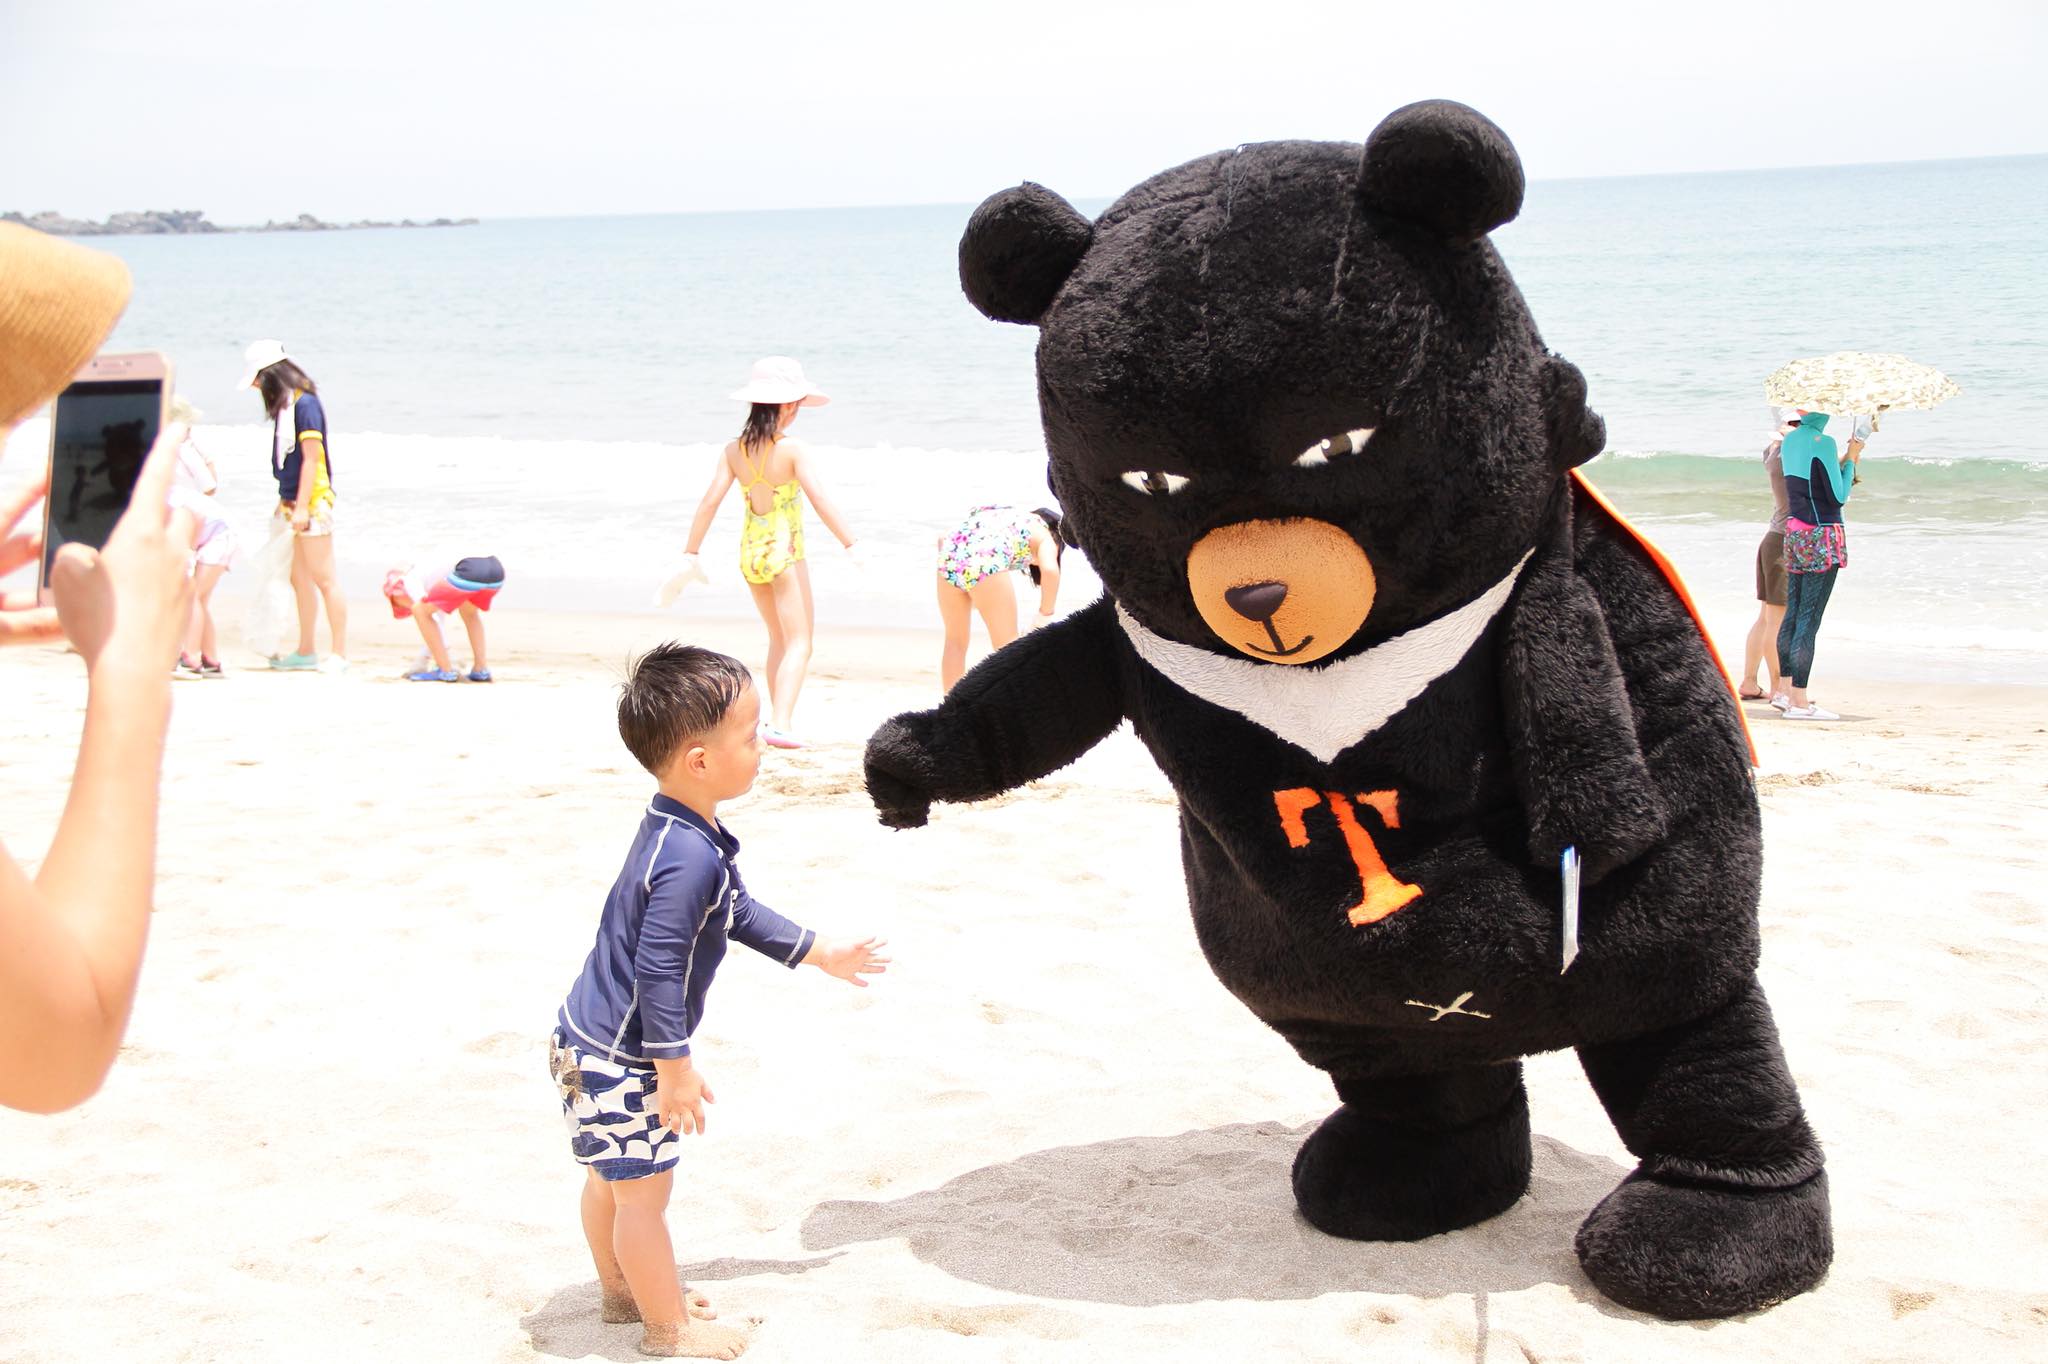 Children played with Oh Bear